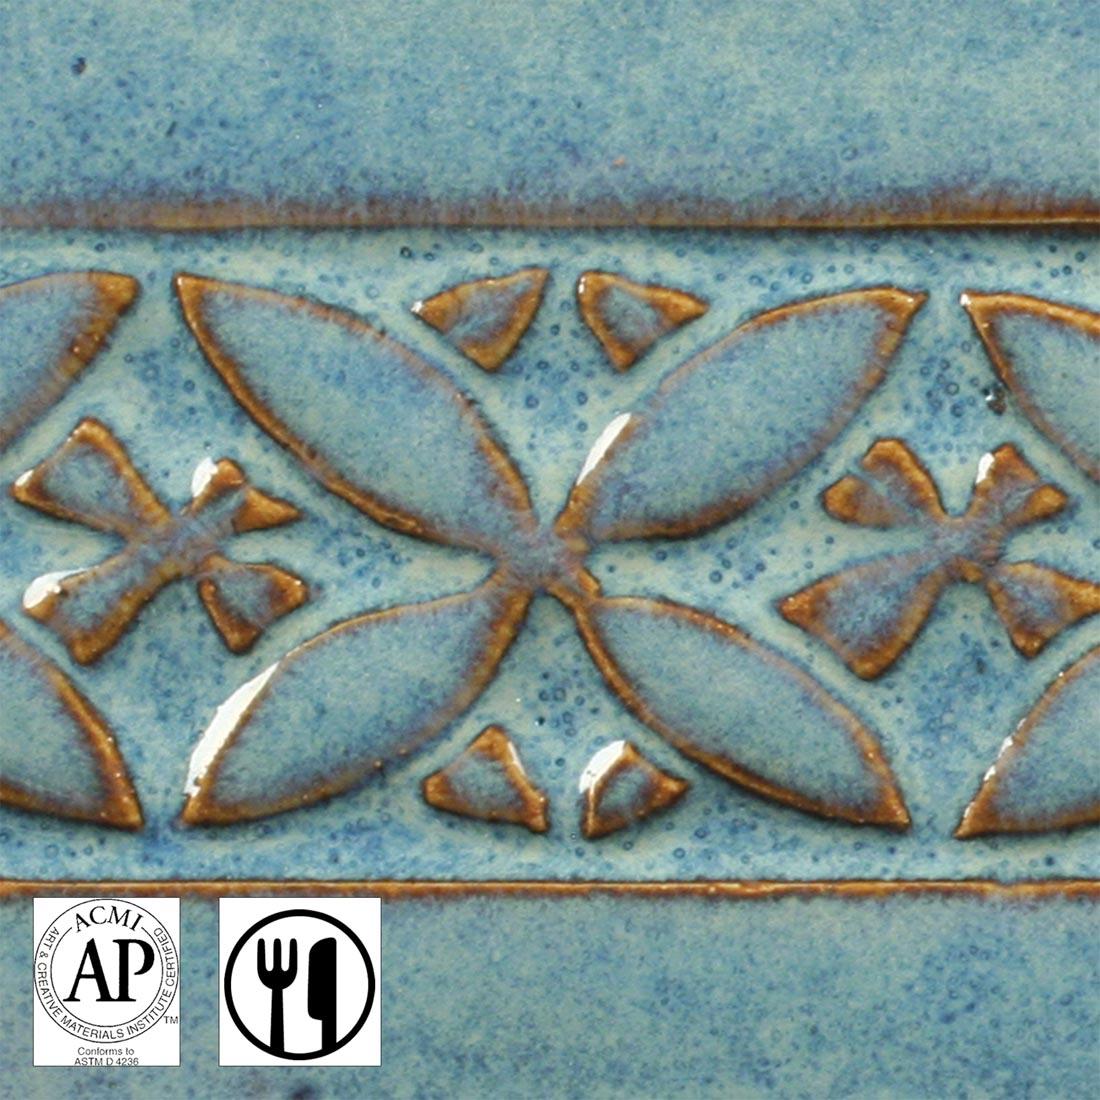 clay tile with Blue Rutile AMACO Potter's Choice High Fire Glaze applied; symbols for AP Seal and food safe